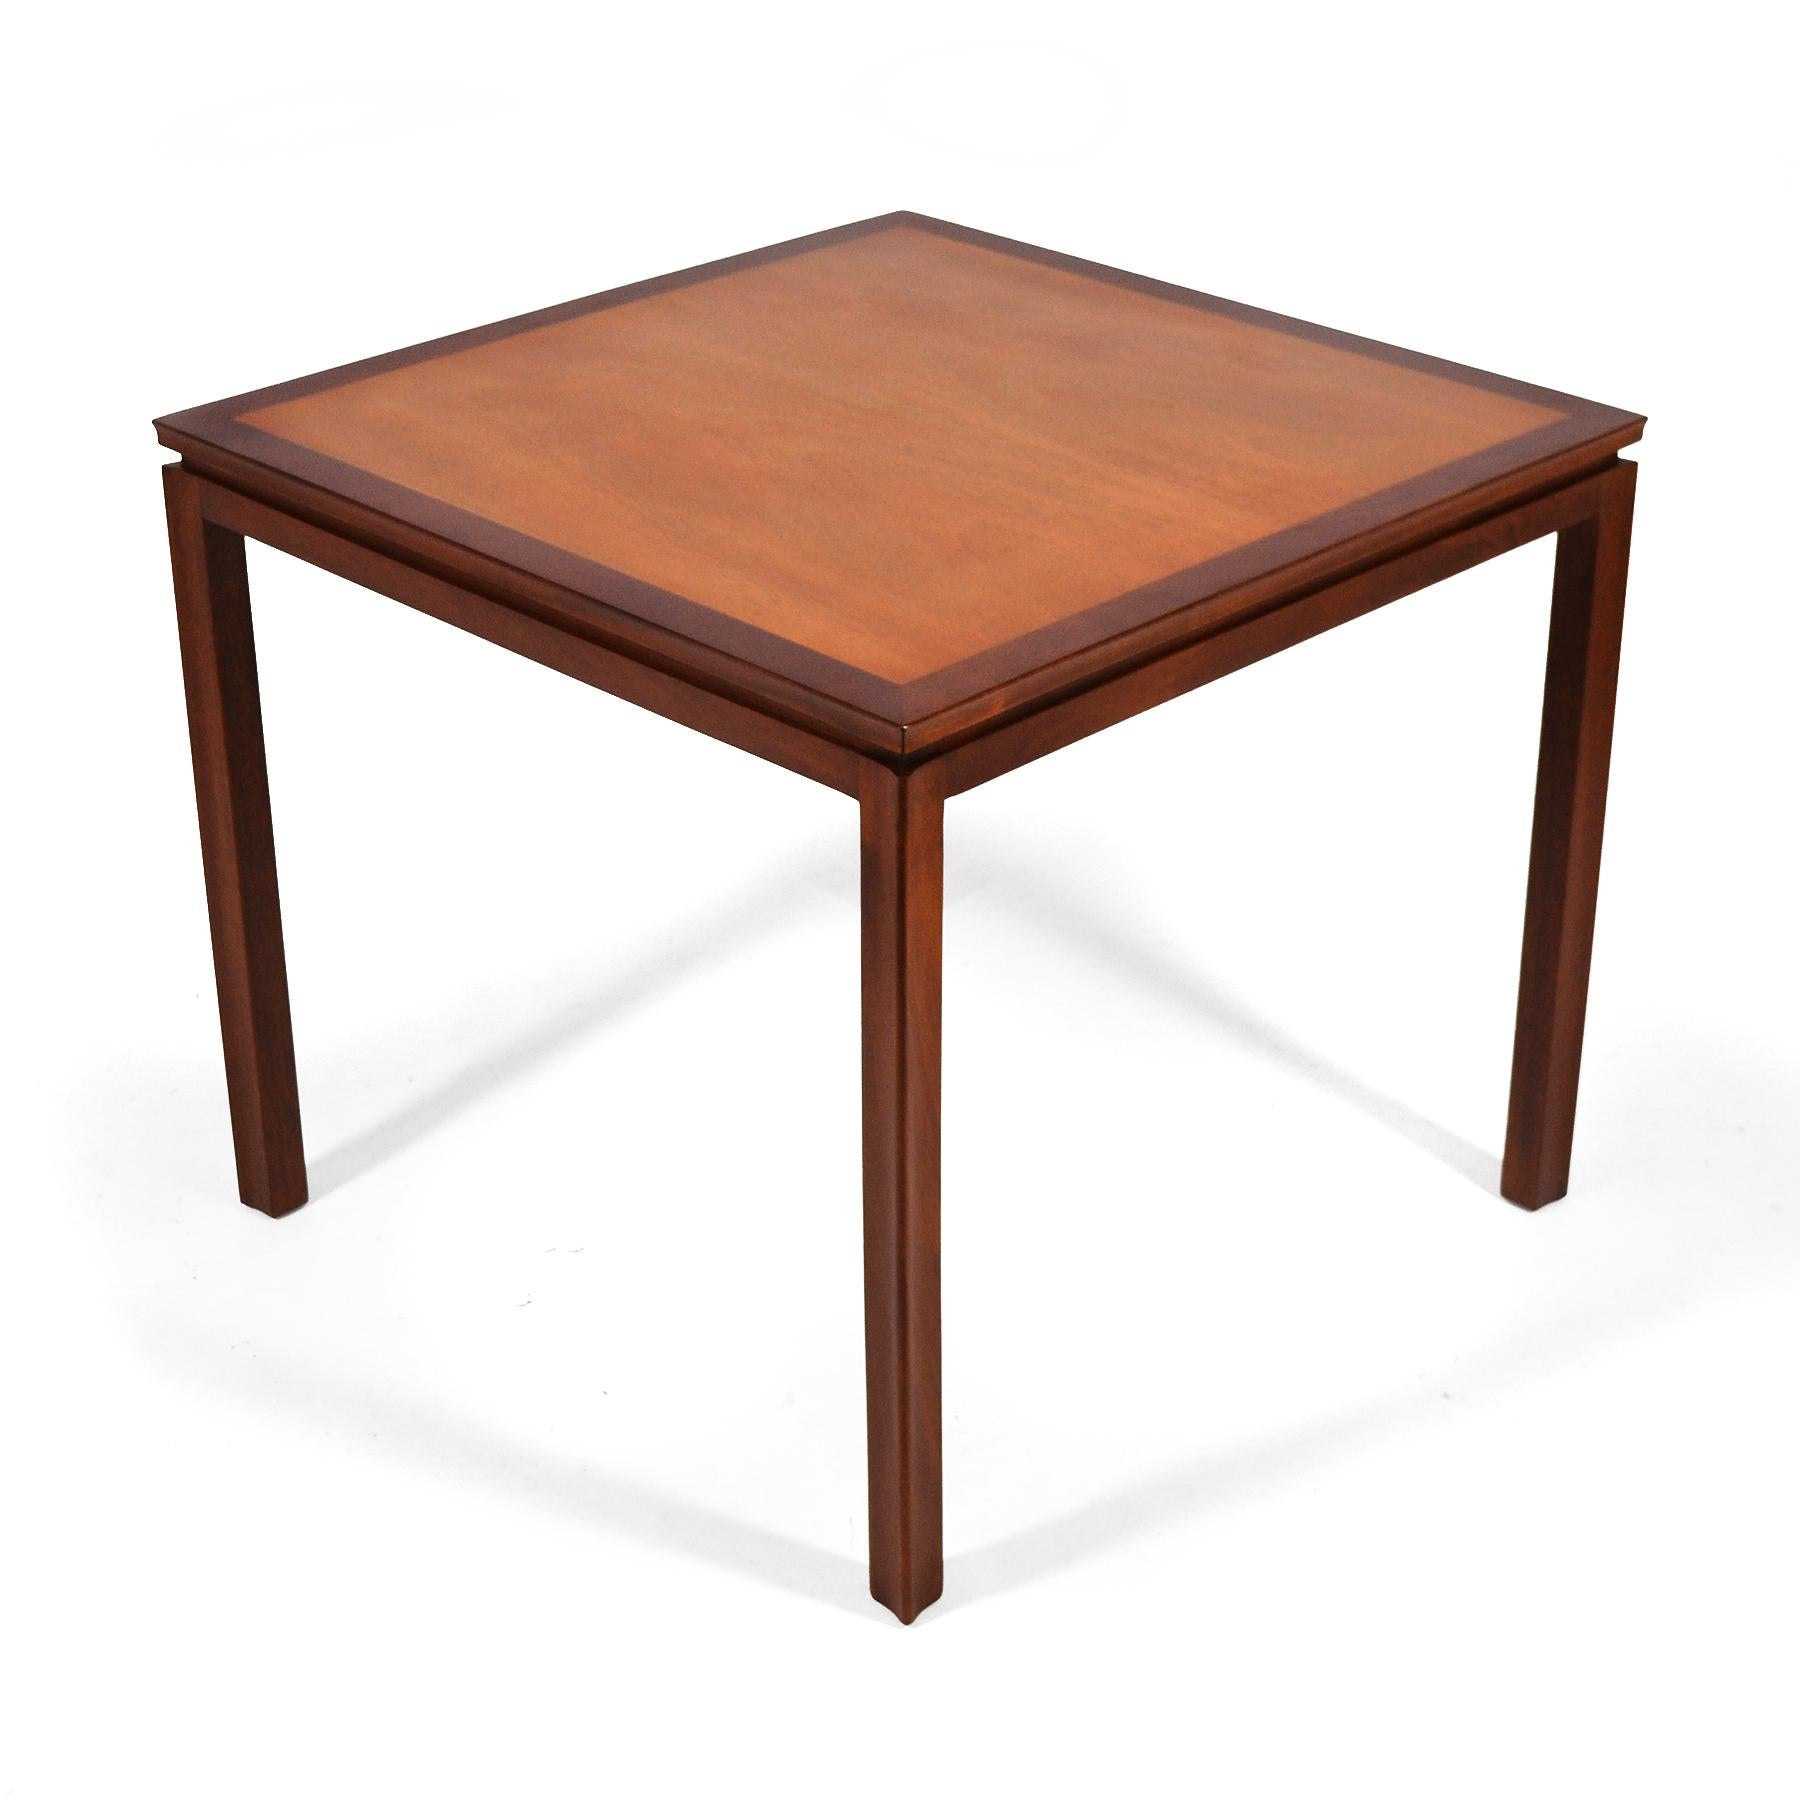 A beautiful design with a wonderful scale and delightful details, this Edward Wormley designed game table by Dunbar is expertly crafted of walnut and mahogany and has just been professionally refinished